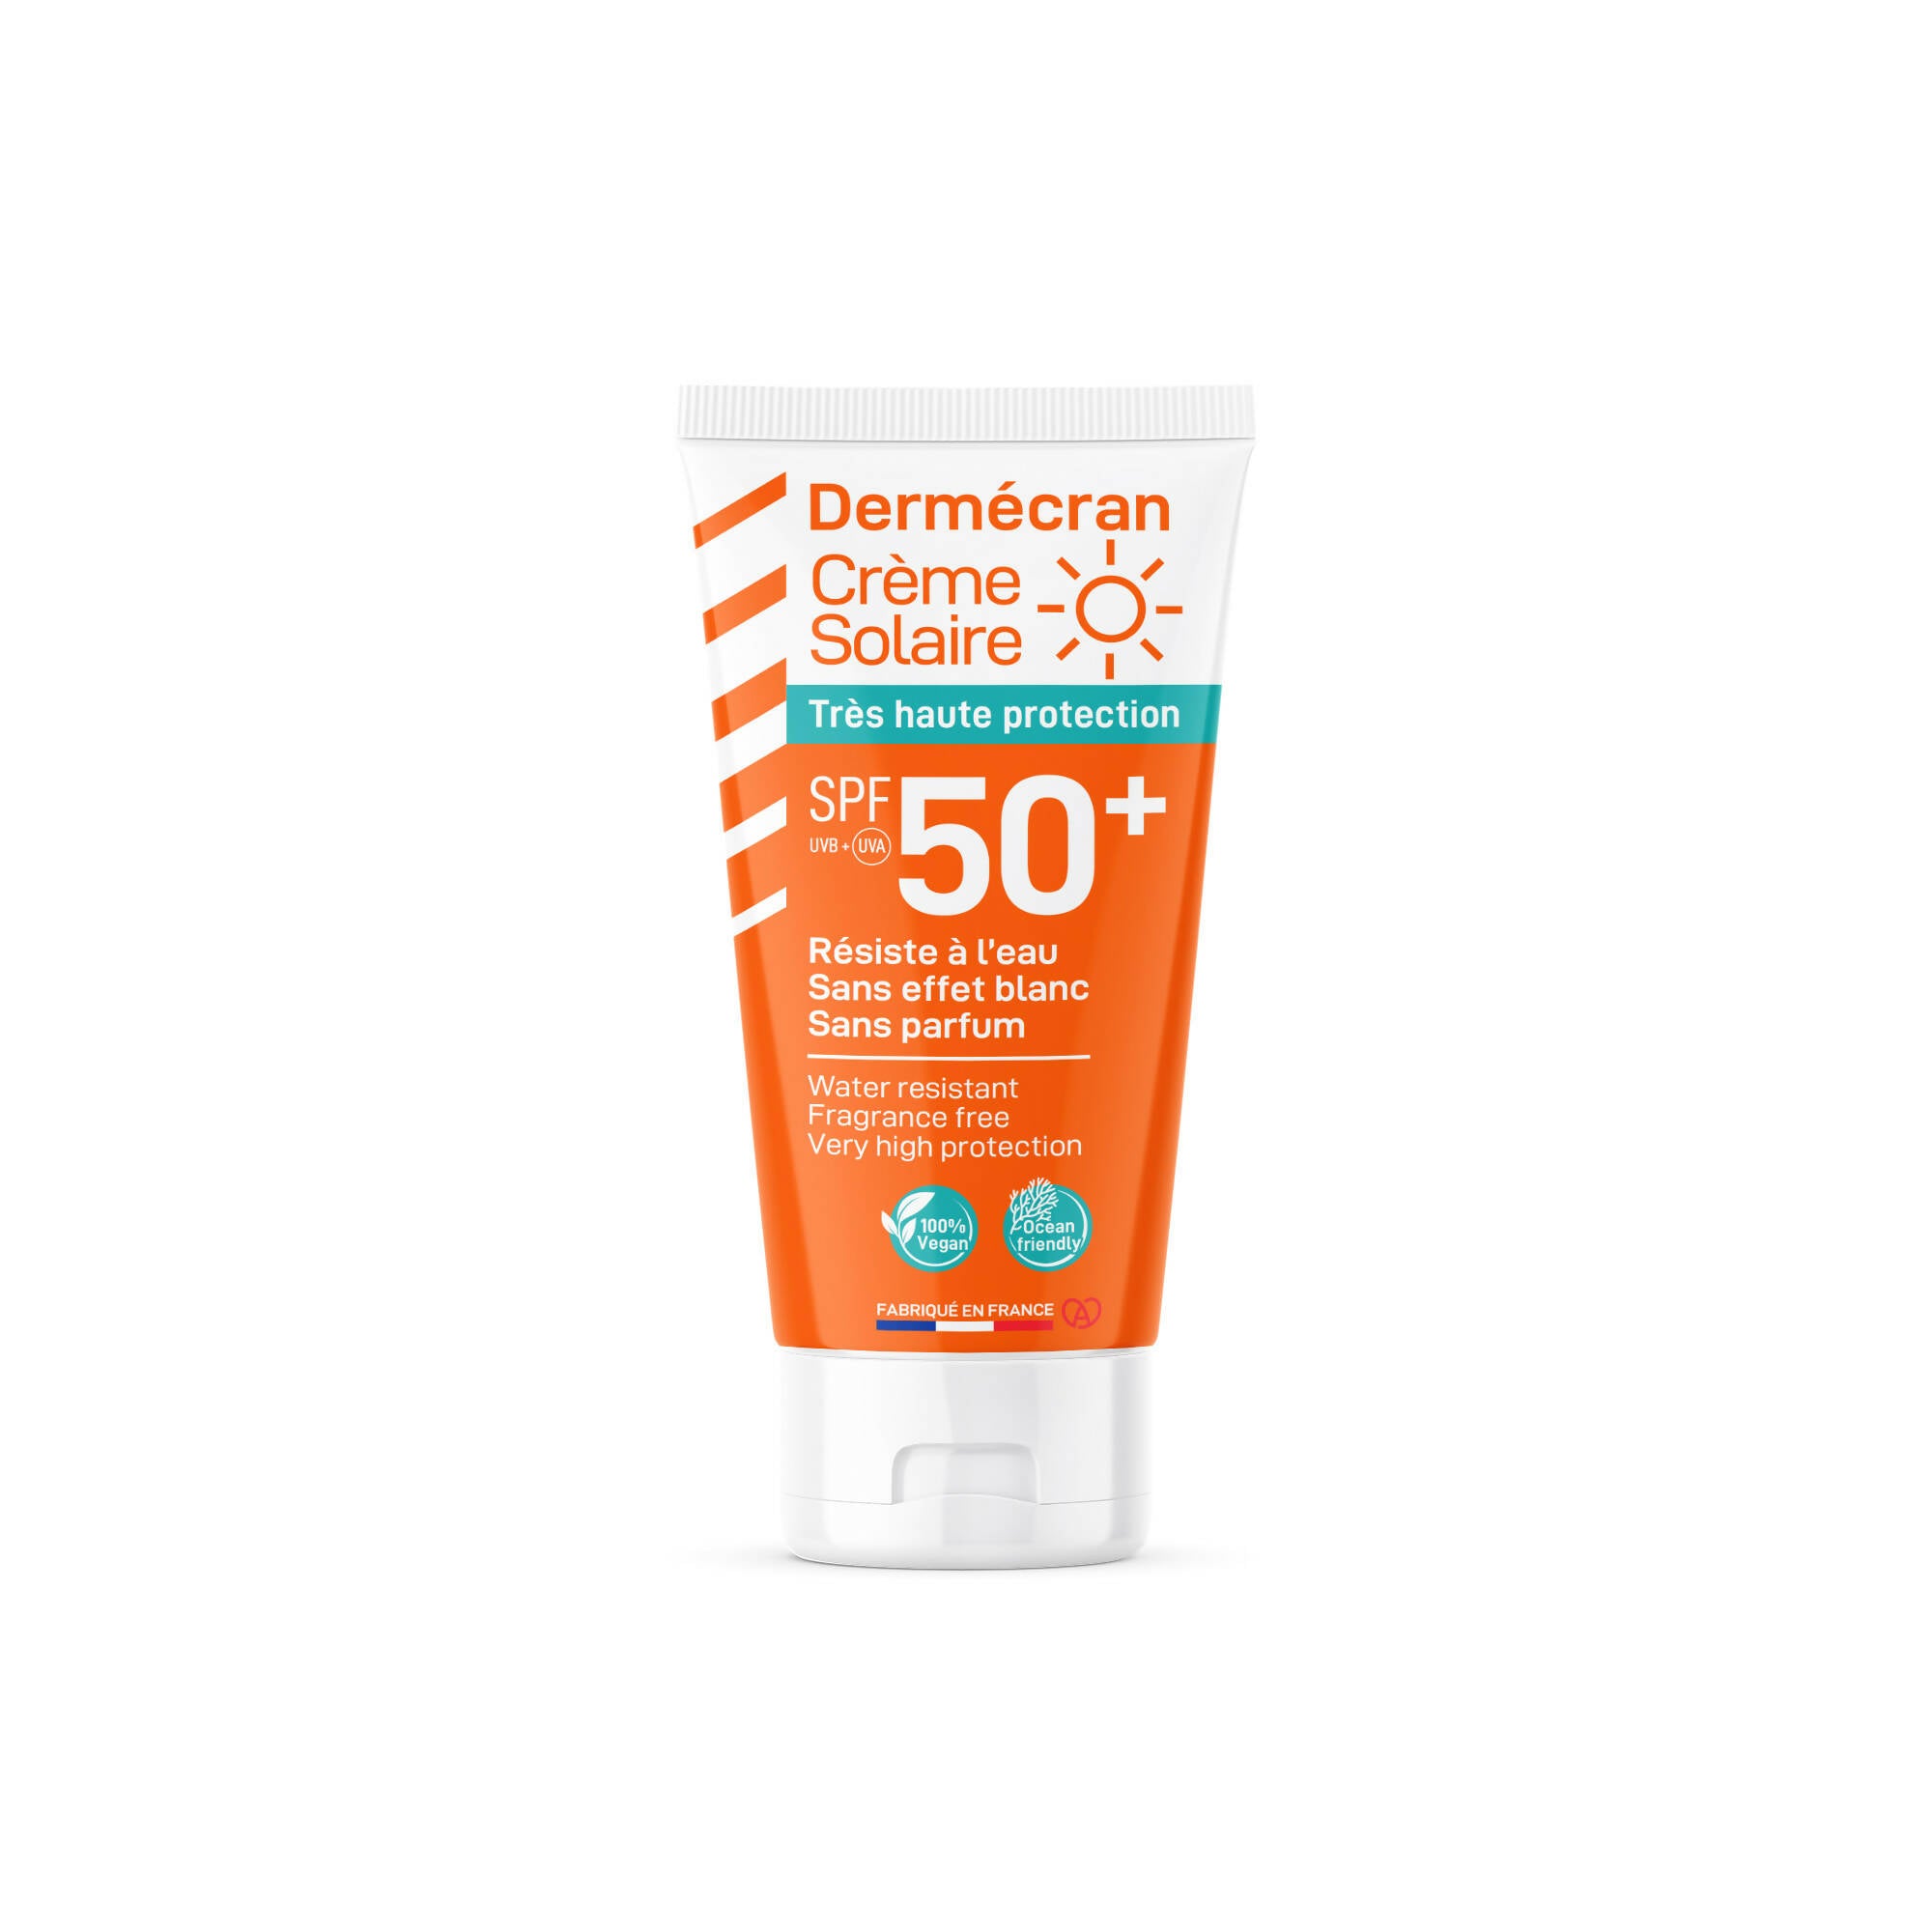 SORIFA - Set of 3 - Dermscreen - SPF50+ sun cream - Face and body - Vegan &amp; Ocean Friendly formula - Water resistant - For the whole family from 3 years old - Made in France - 50 ml tube - 0